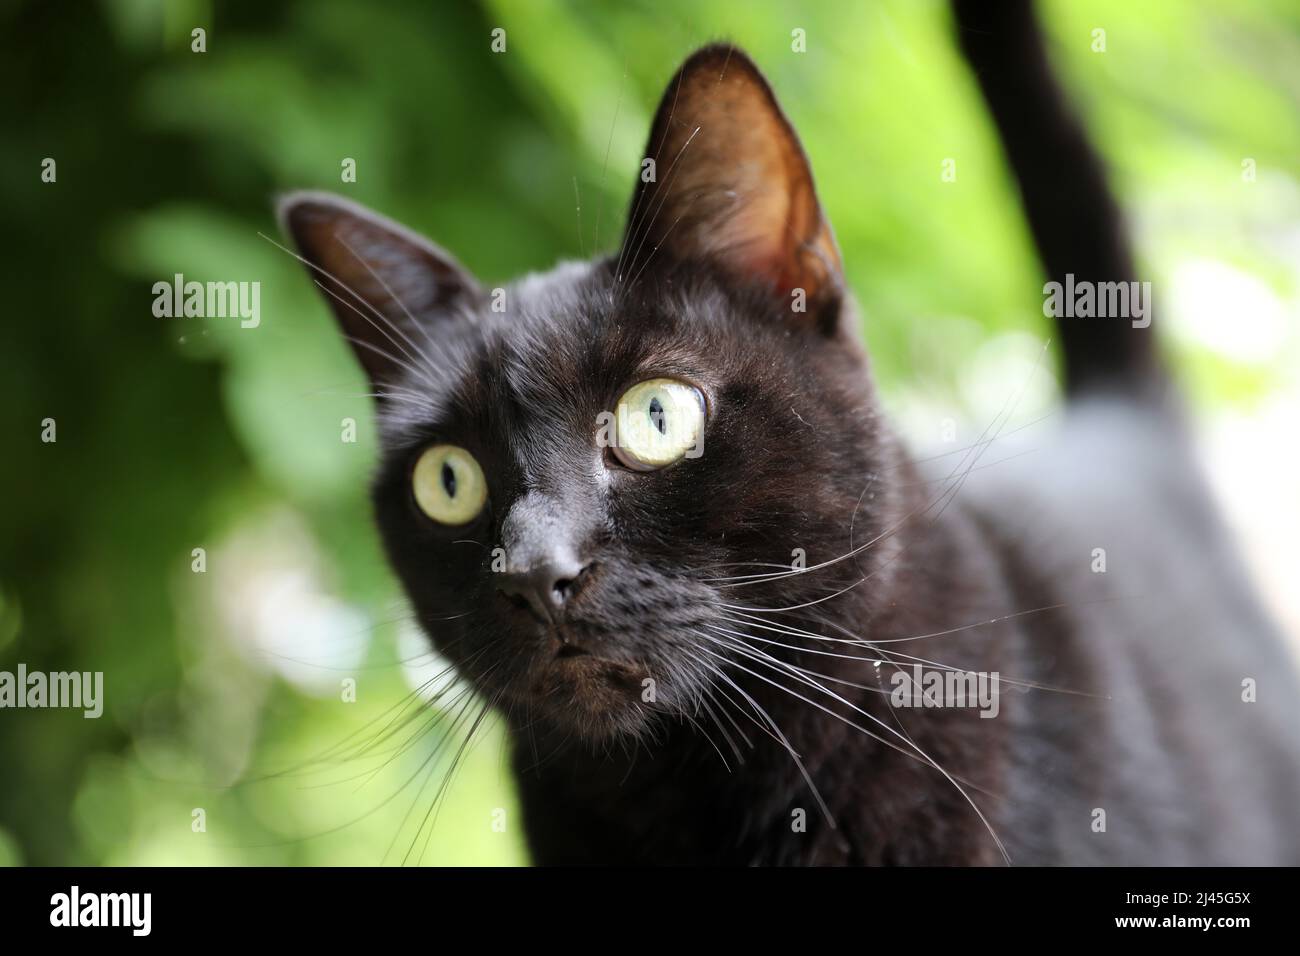 Black cat, head with eyes, ears and whiskers, sense organs Stock Photo